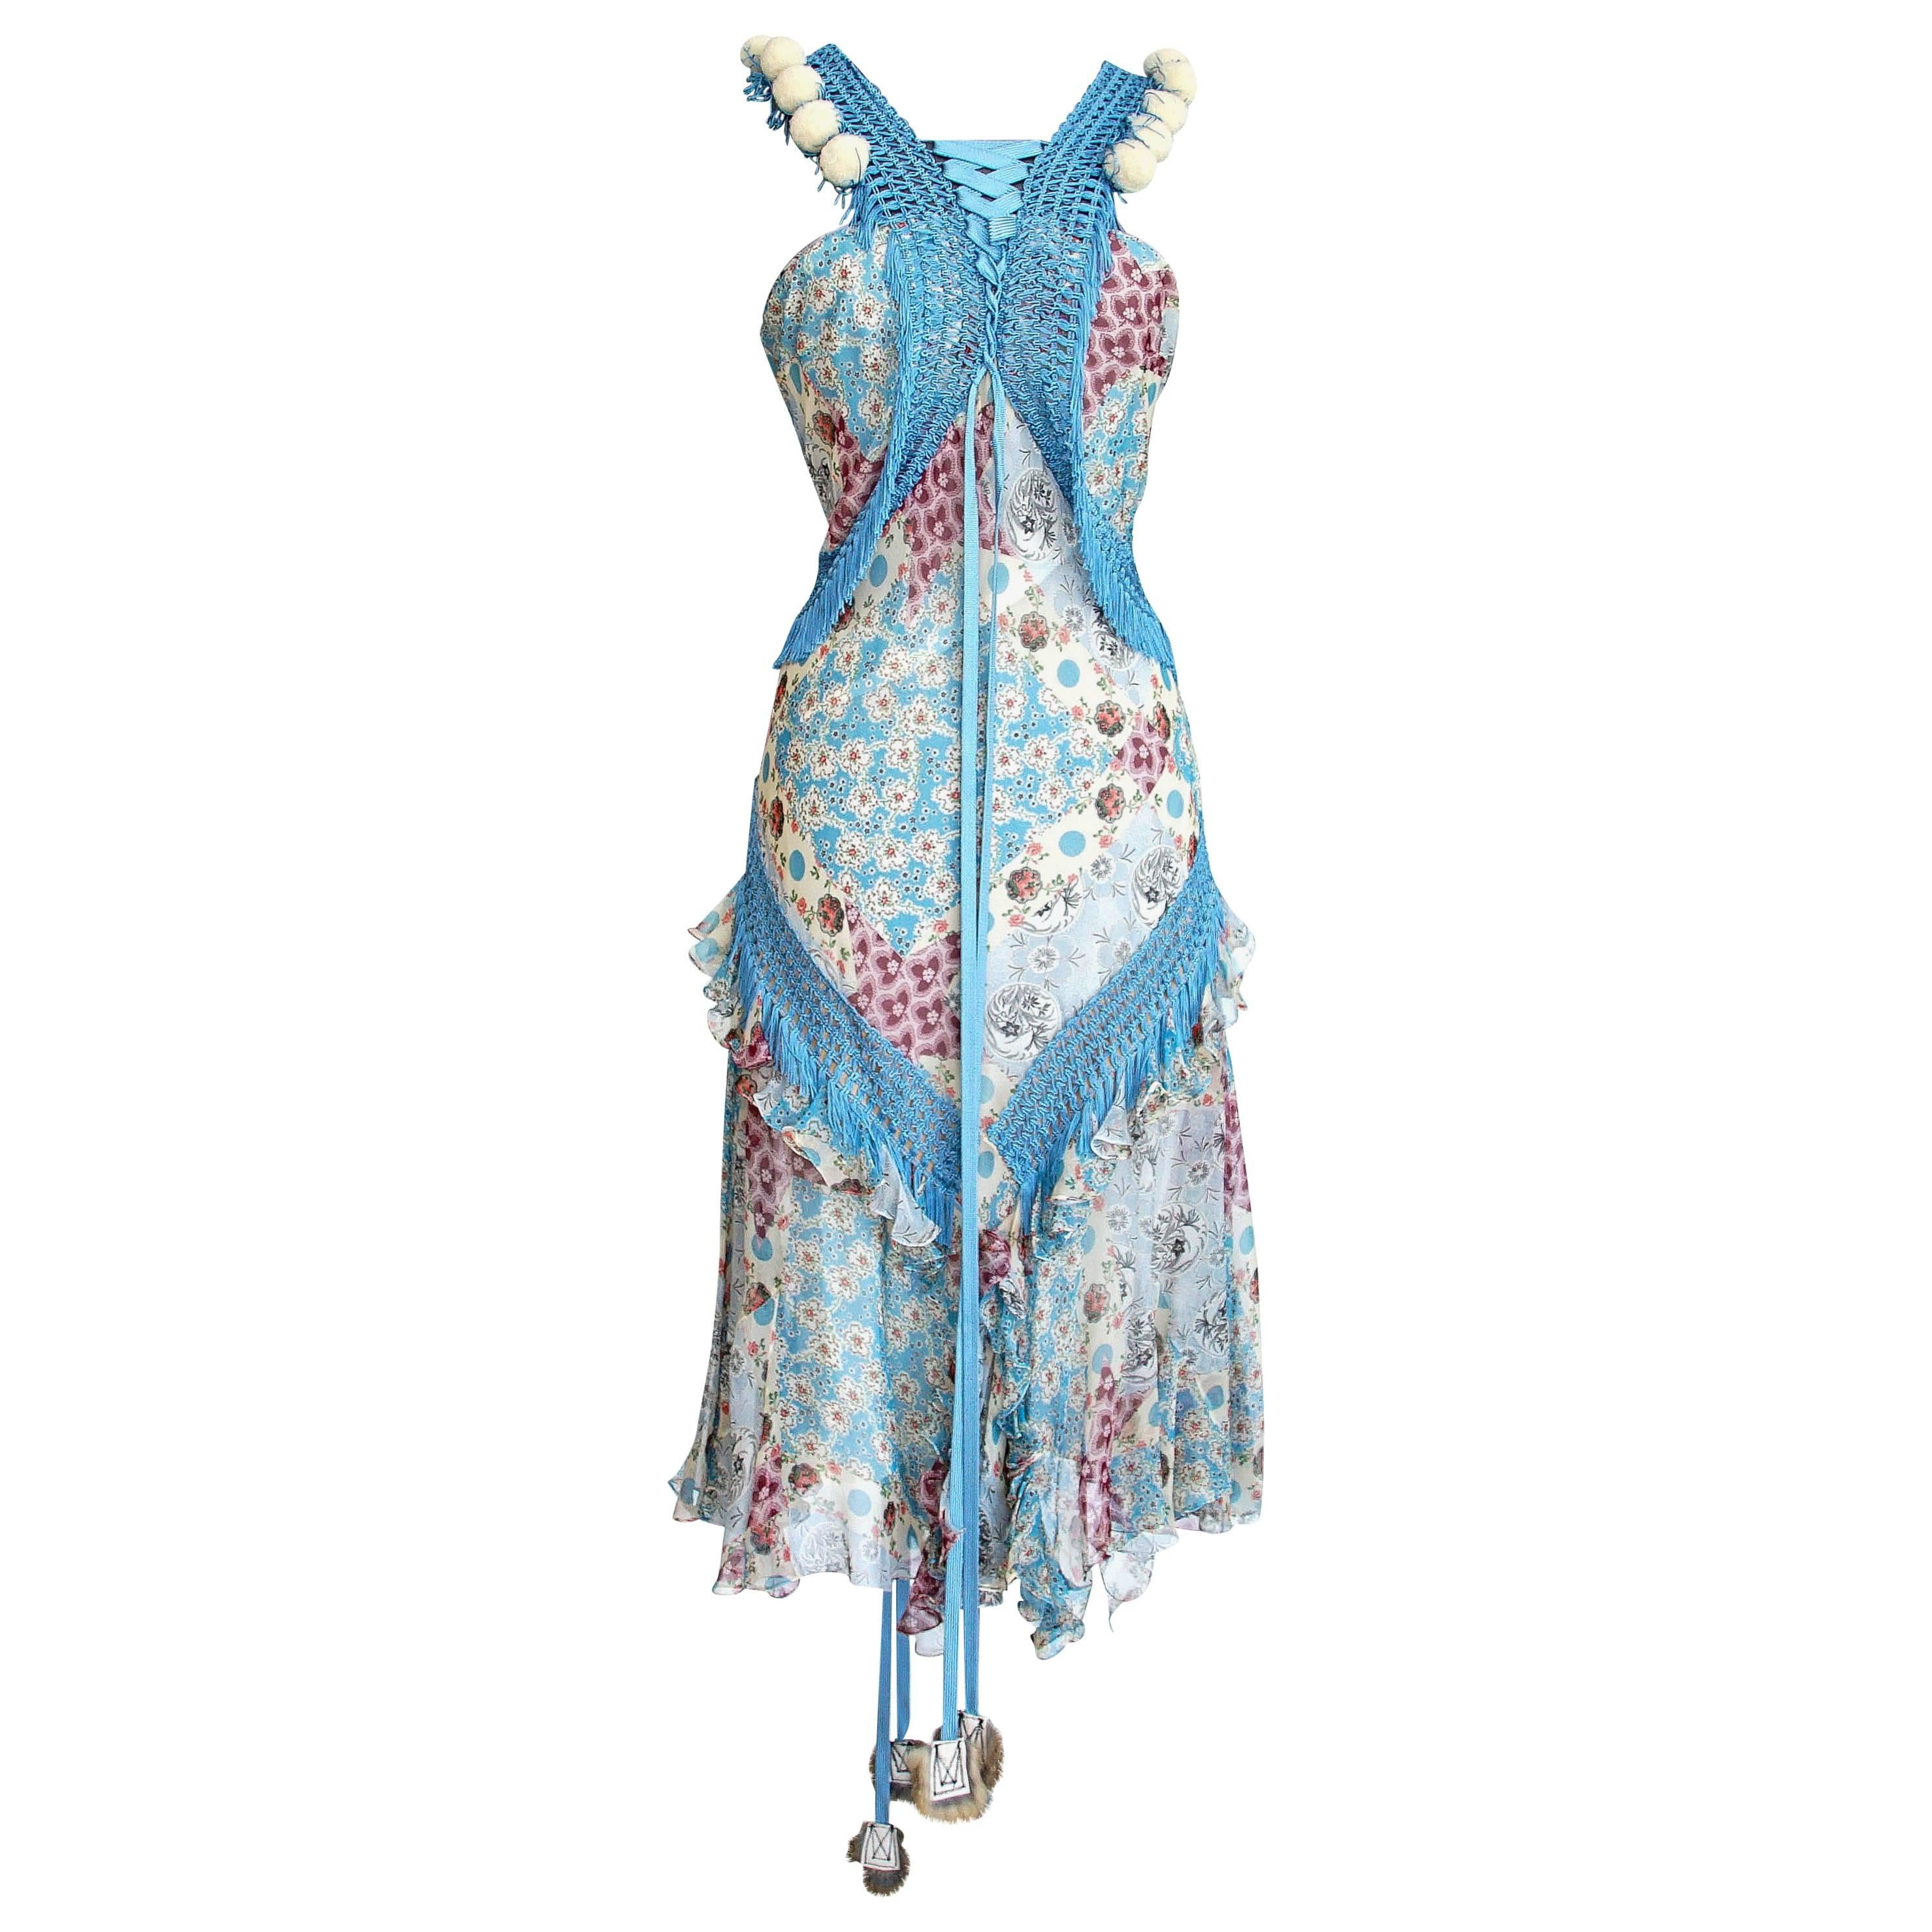 CHRISTIAN DIOR by JOHN GALLIANO dress iconic floral  fits 4 to 6